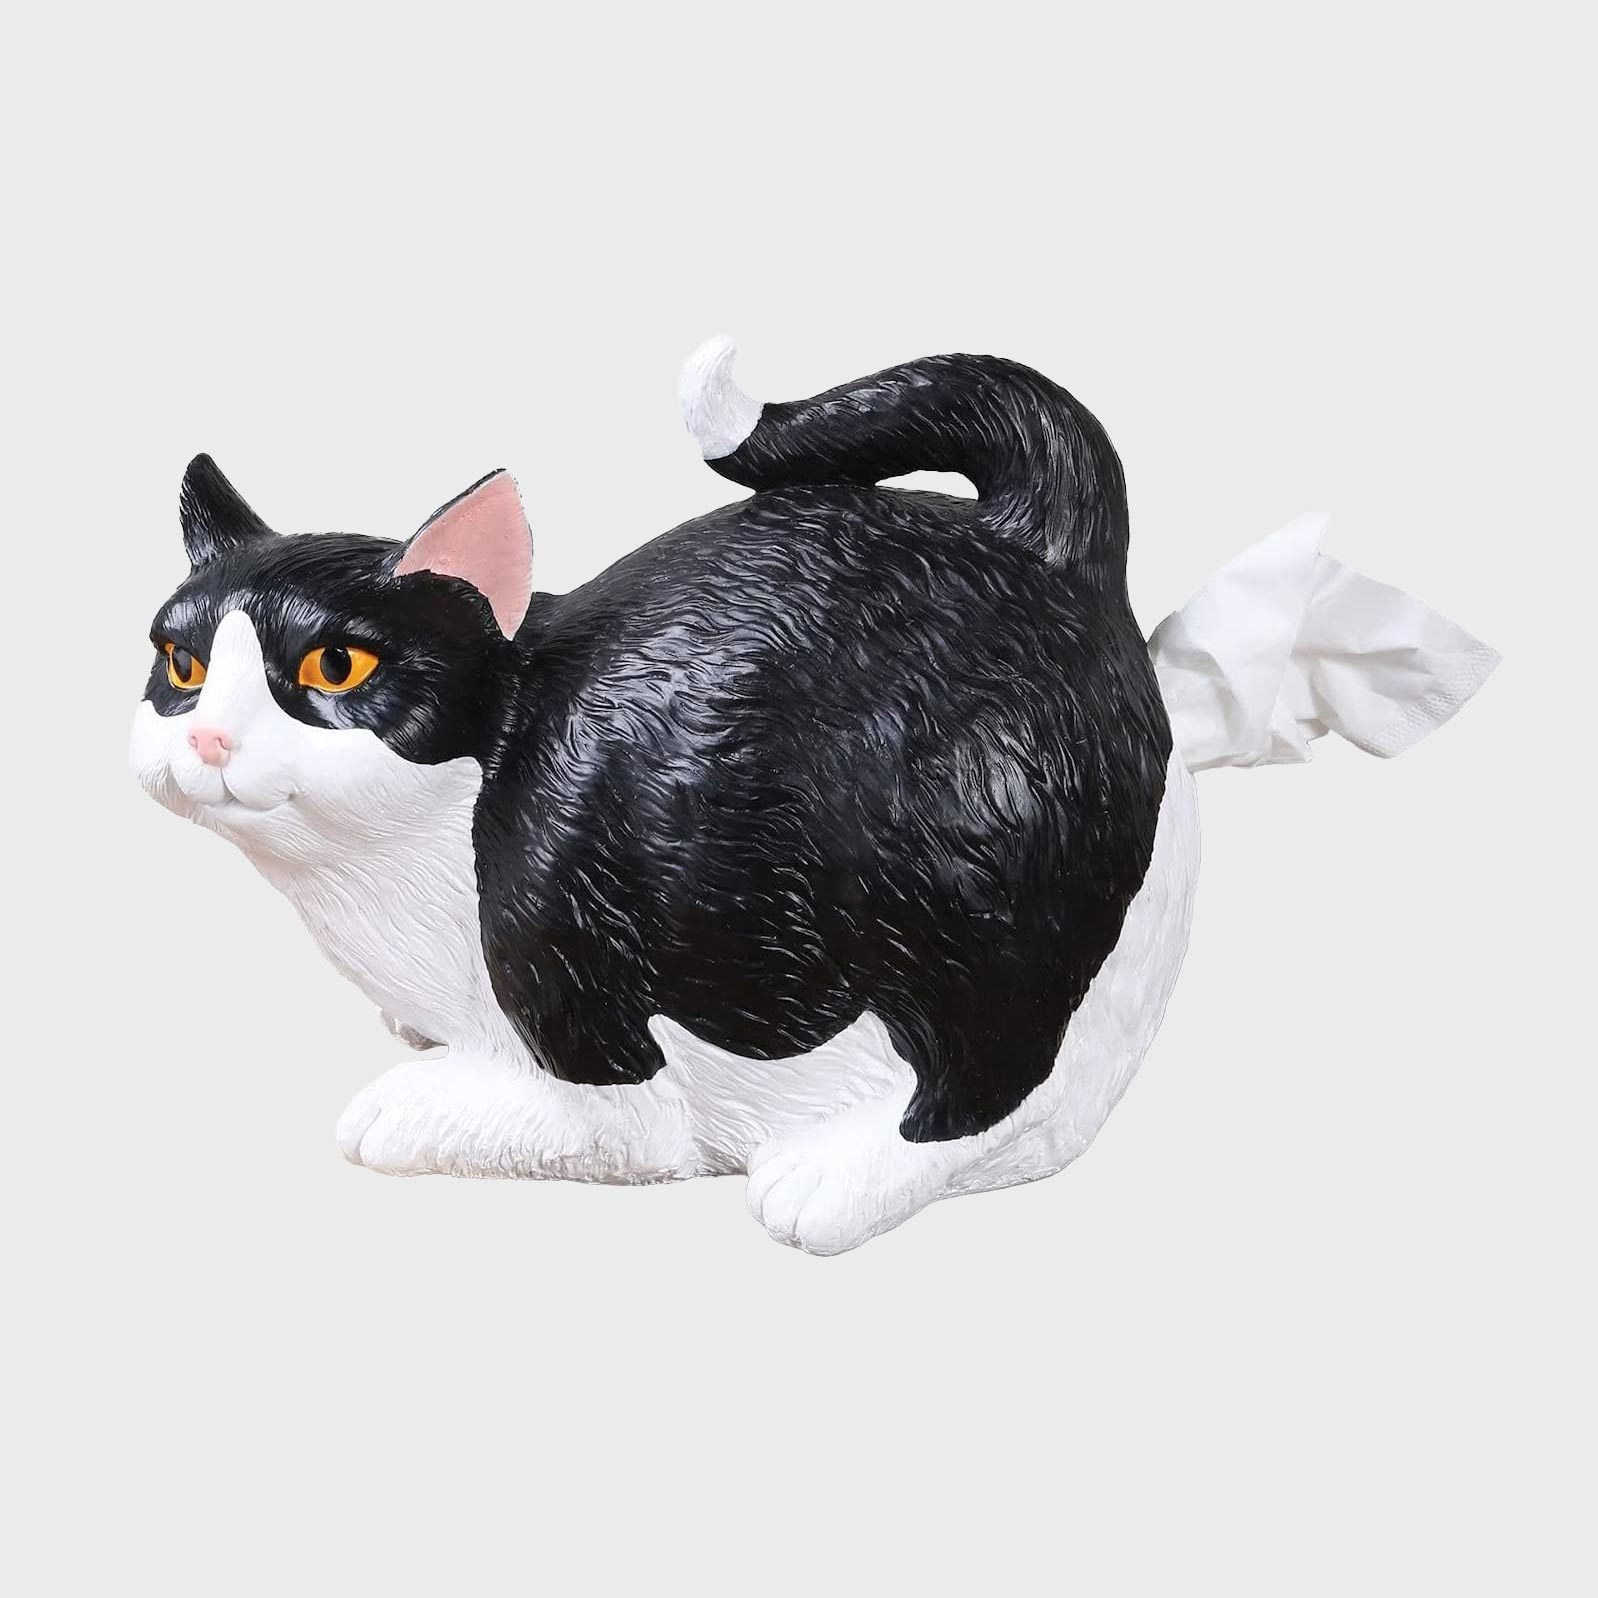 https://www.rd.com/wp-content/uploads/2021/06/WHAT-ON-EARTH-Cat-Butt-Tissue-Holder_ecomm_via-amazon.com_.jpg?fit=700%2C700